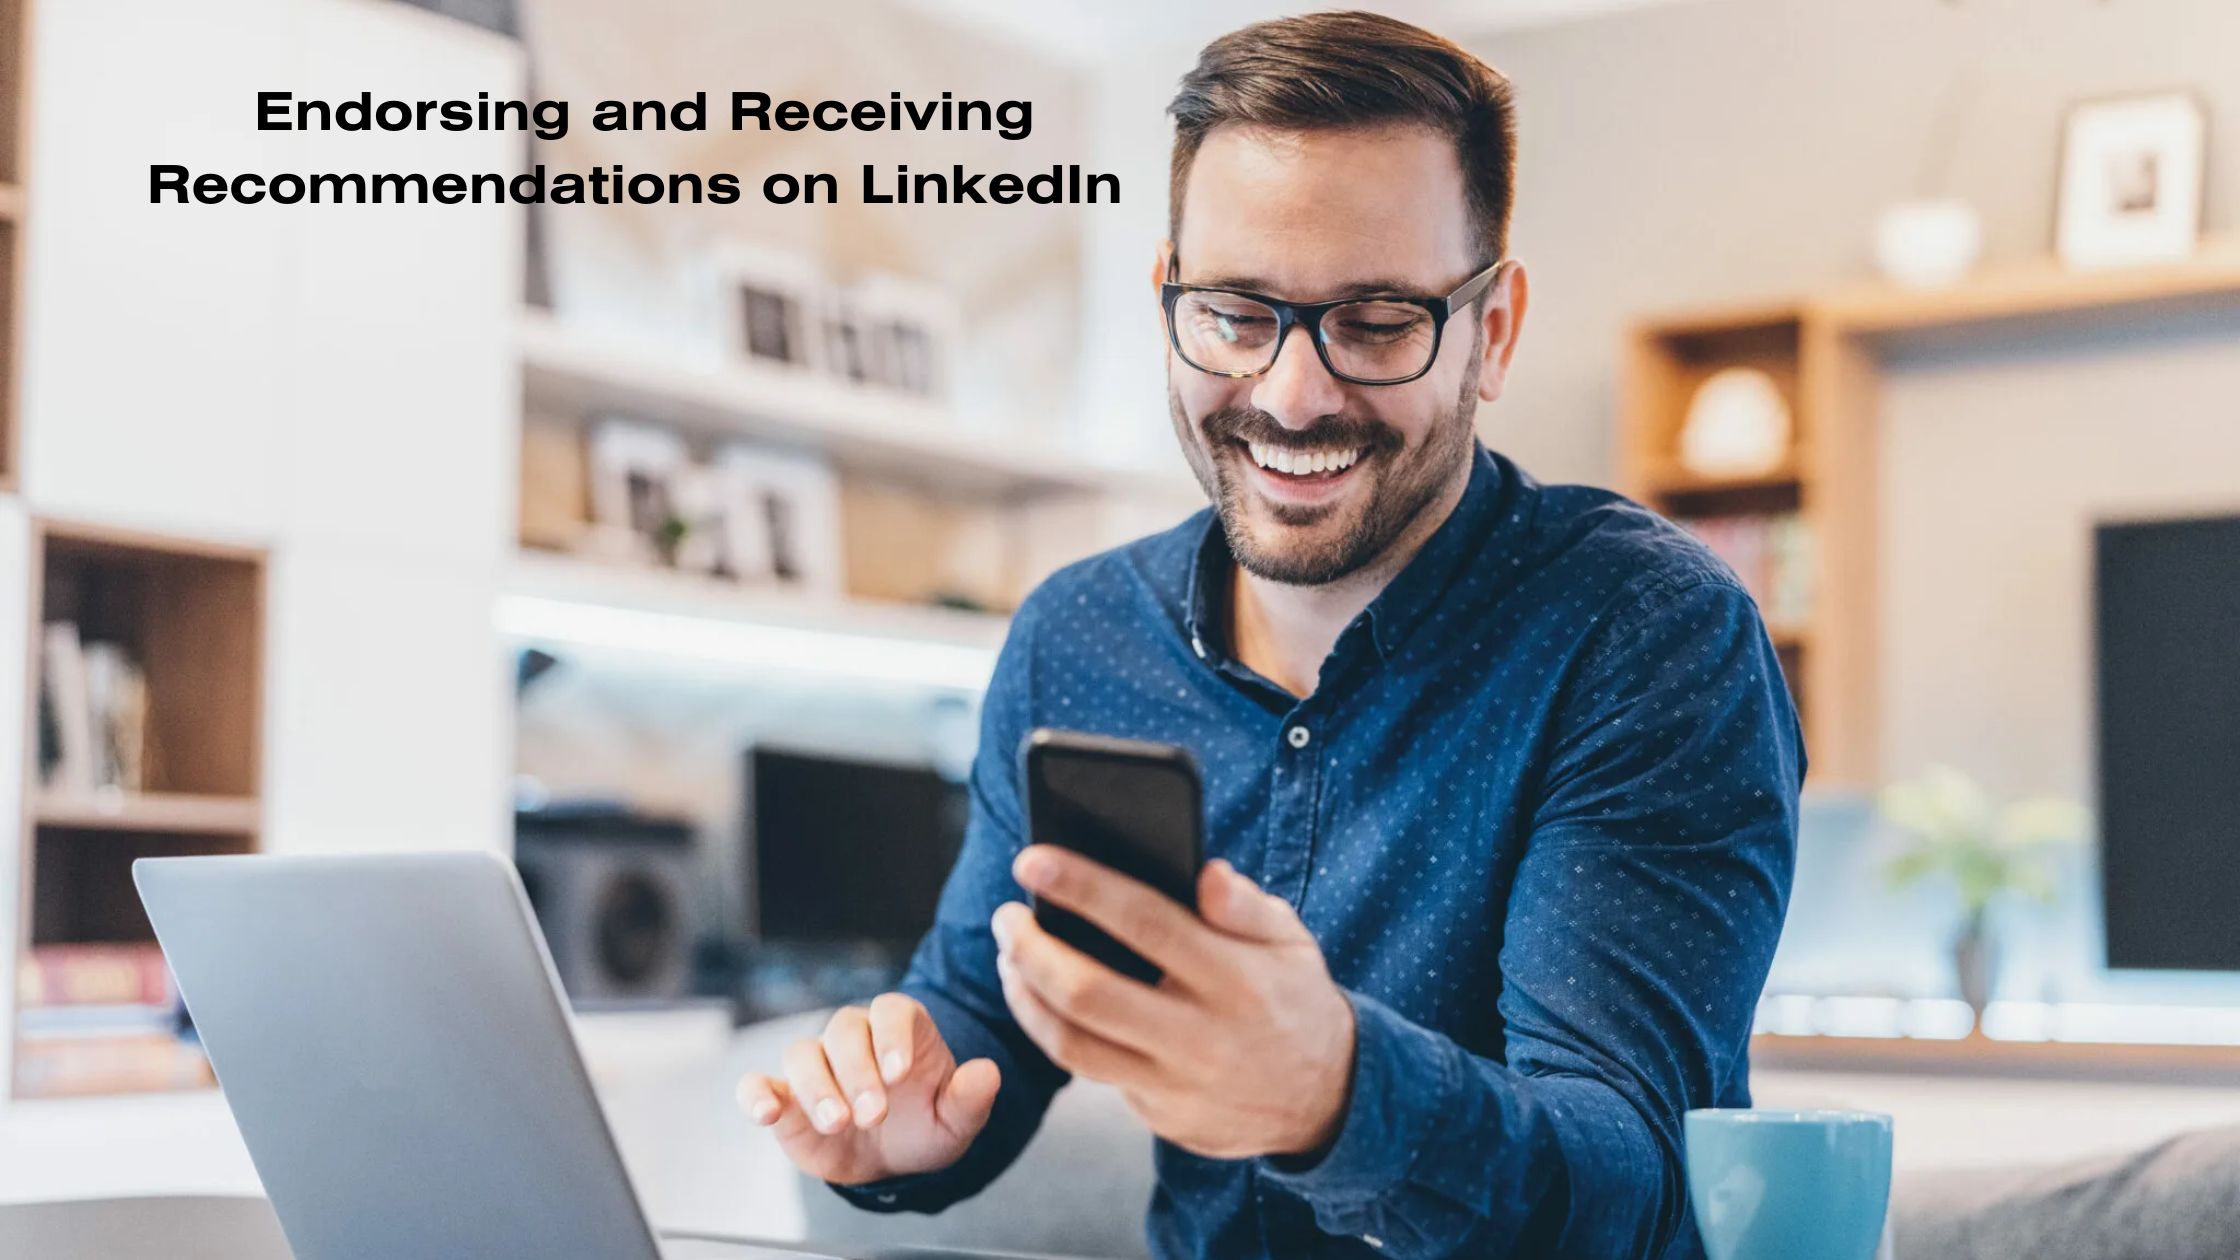 Endorsing and Receiving Recommendations on LinkedIn